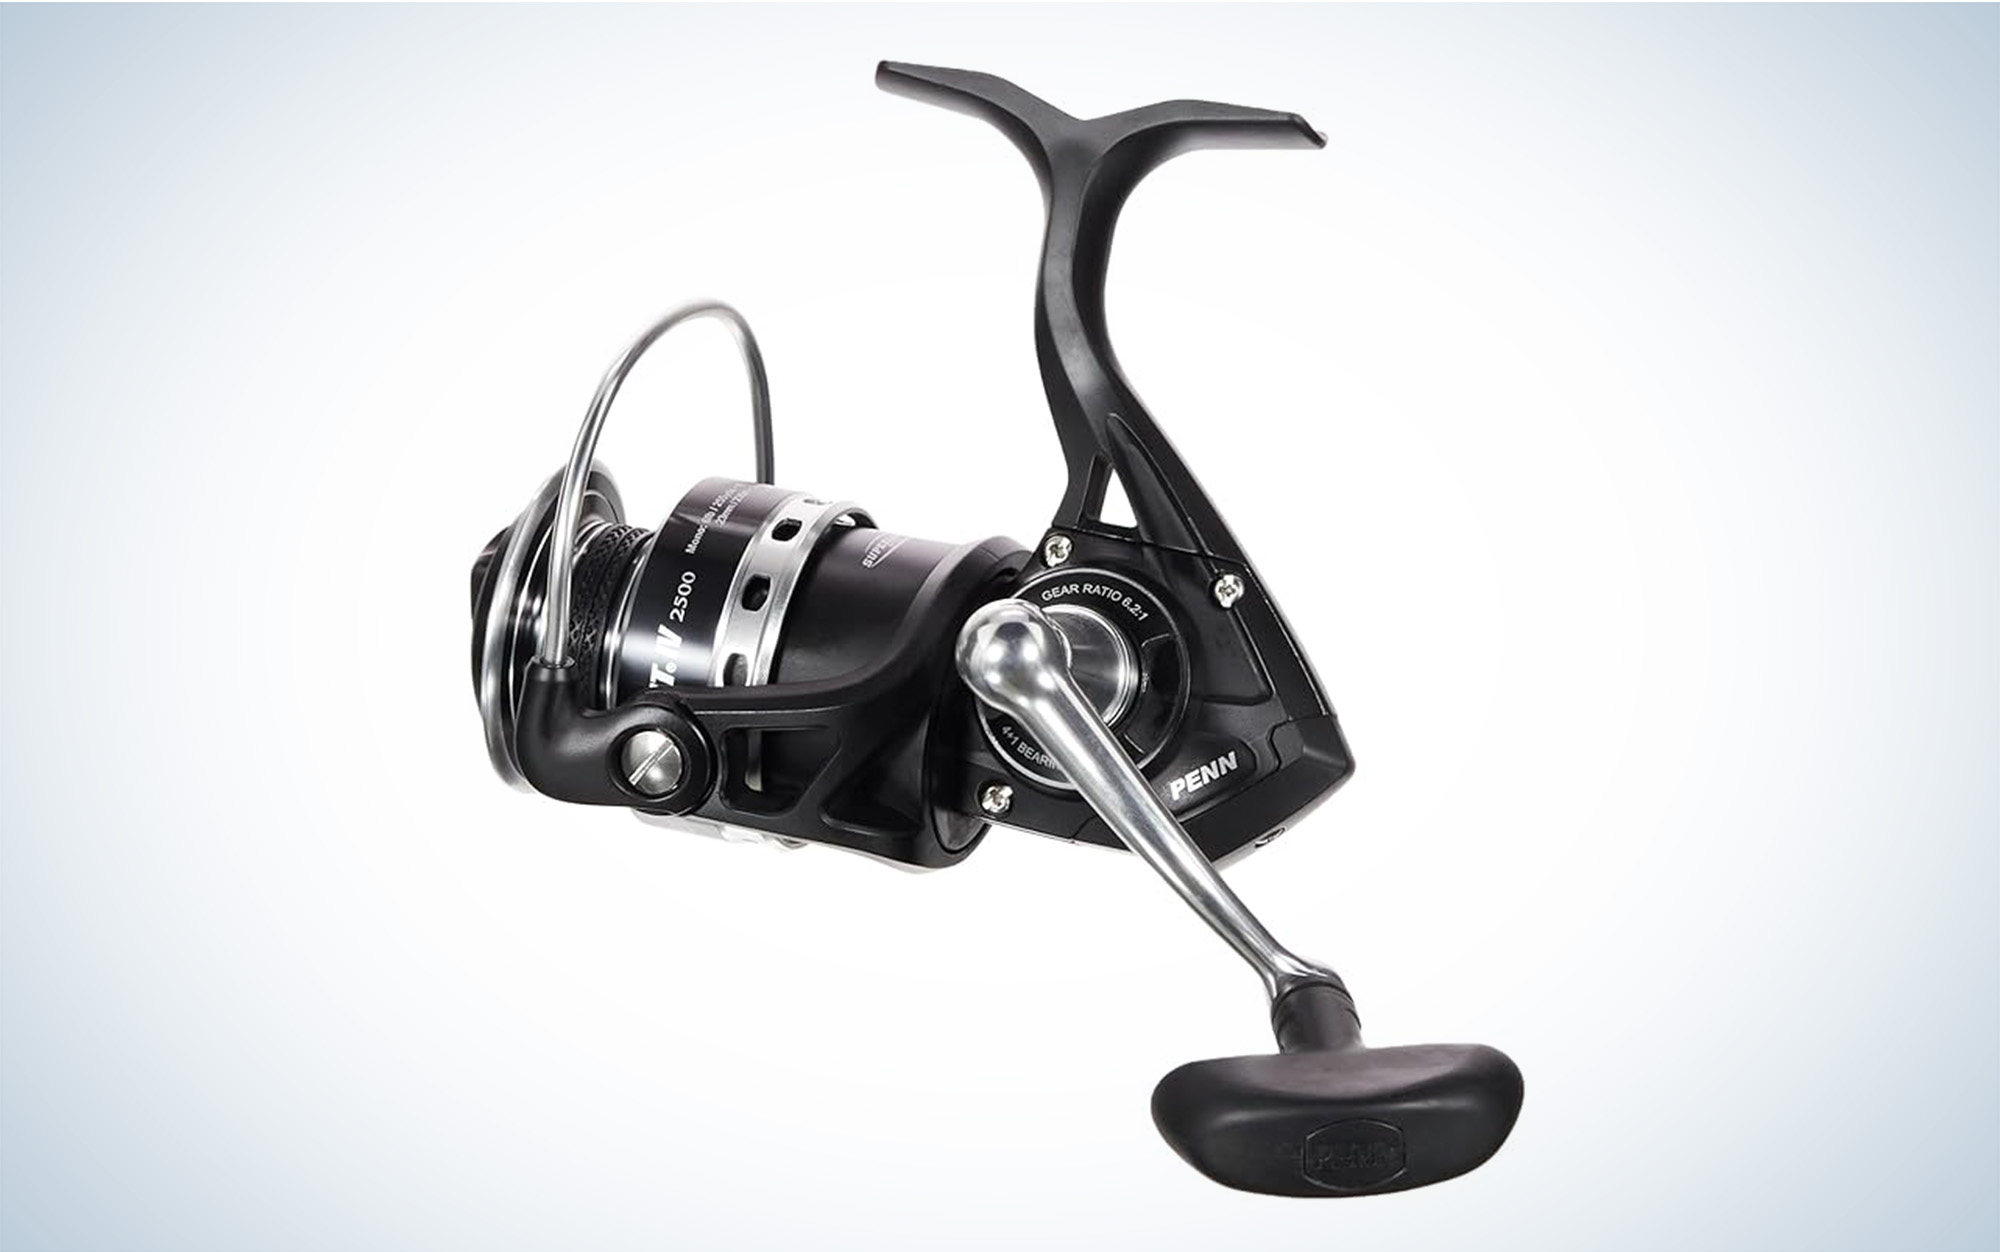 100+ affordable shimano reel spinning For Sale